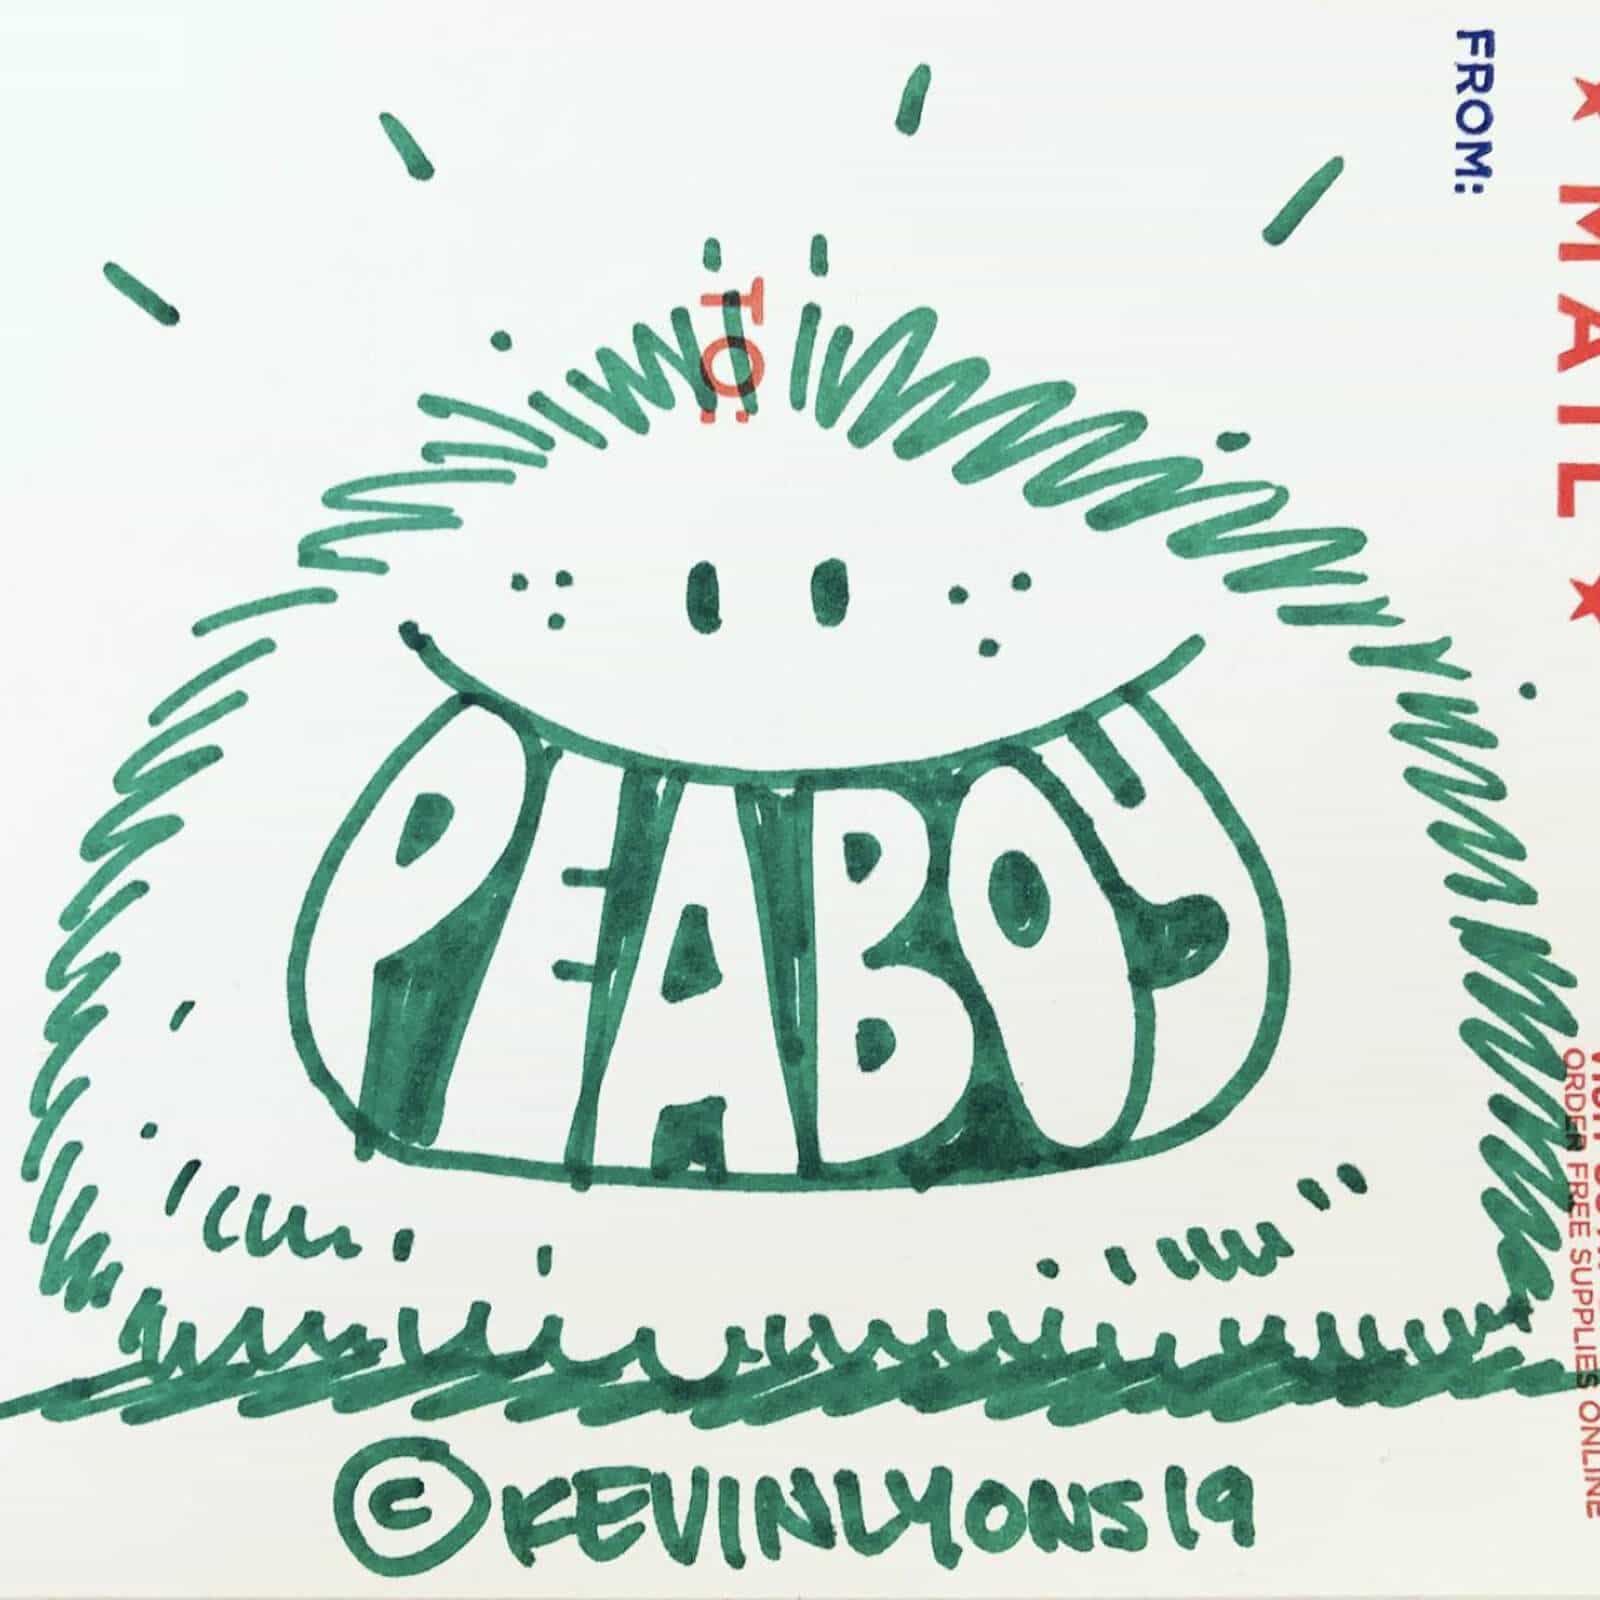 Peaboy by Kevin Lyons